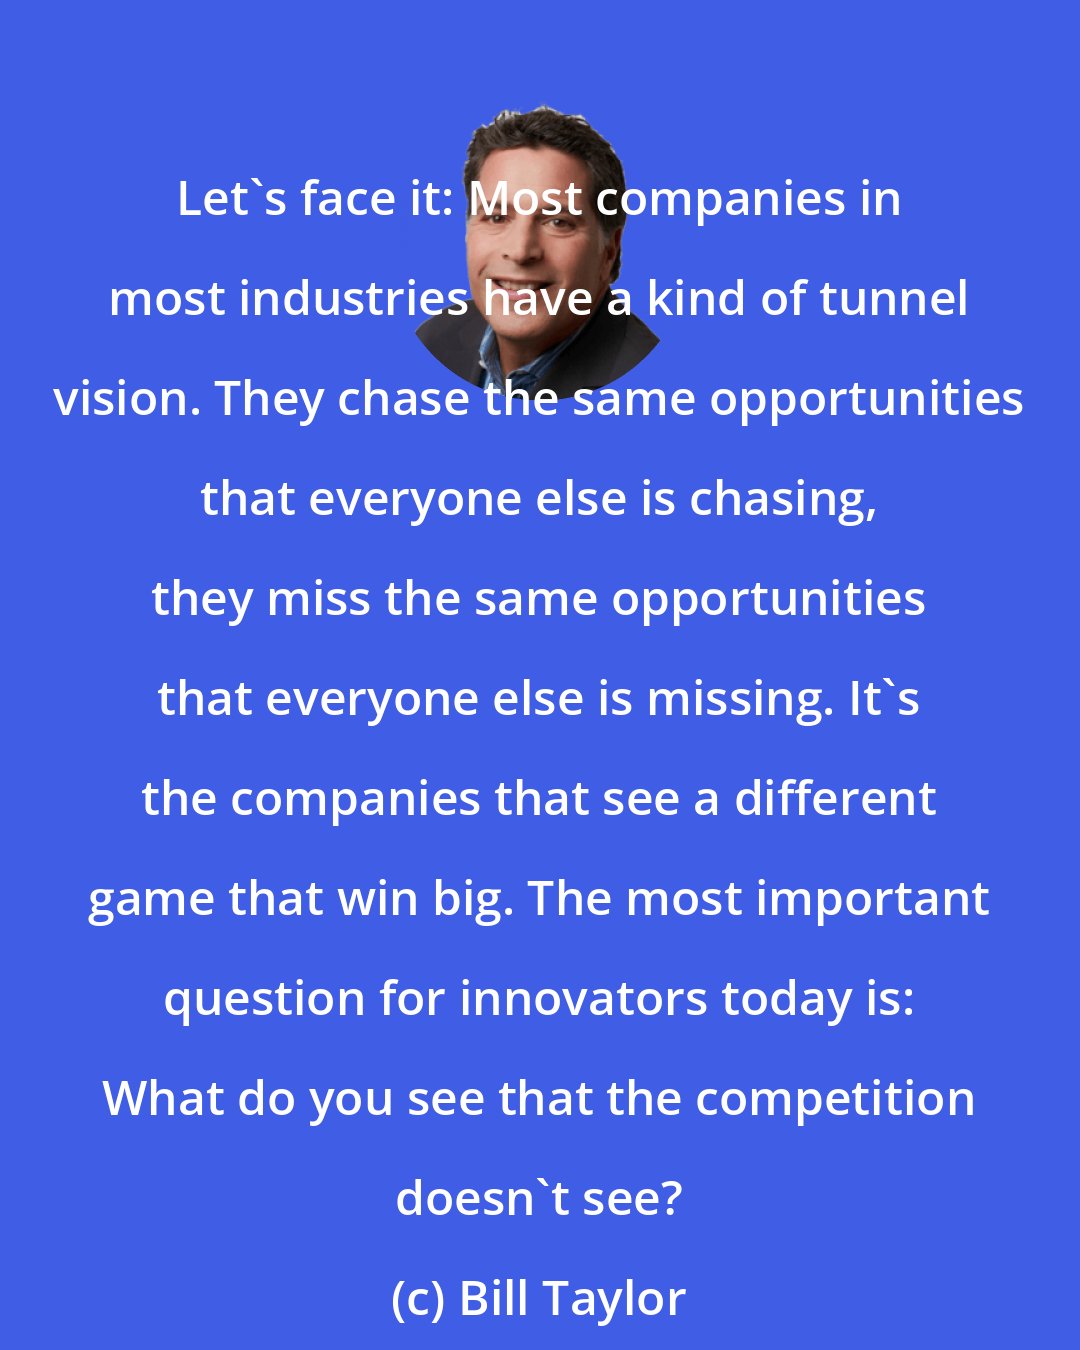 Bill Taylor: Let's face it: Most companies in most industries have a kind of tunnel vision. They chase the same opportunities that everyone else is chasing, they miss the same opportunities that everyone else is missing. It's the companies that see a different game that win big. The most important question for innovators today is: What do you see that the competition doesn't see?